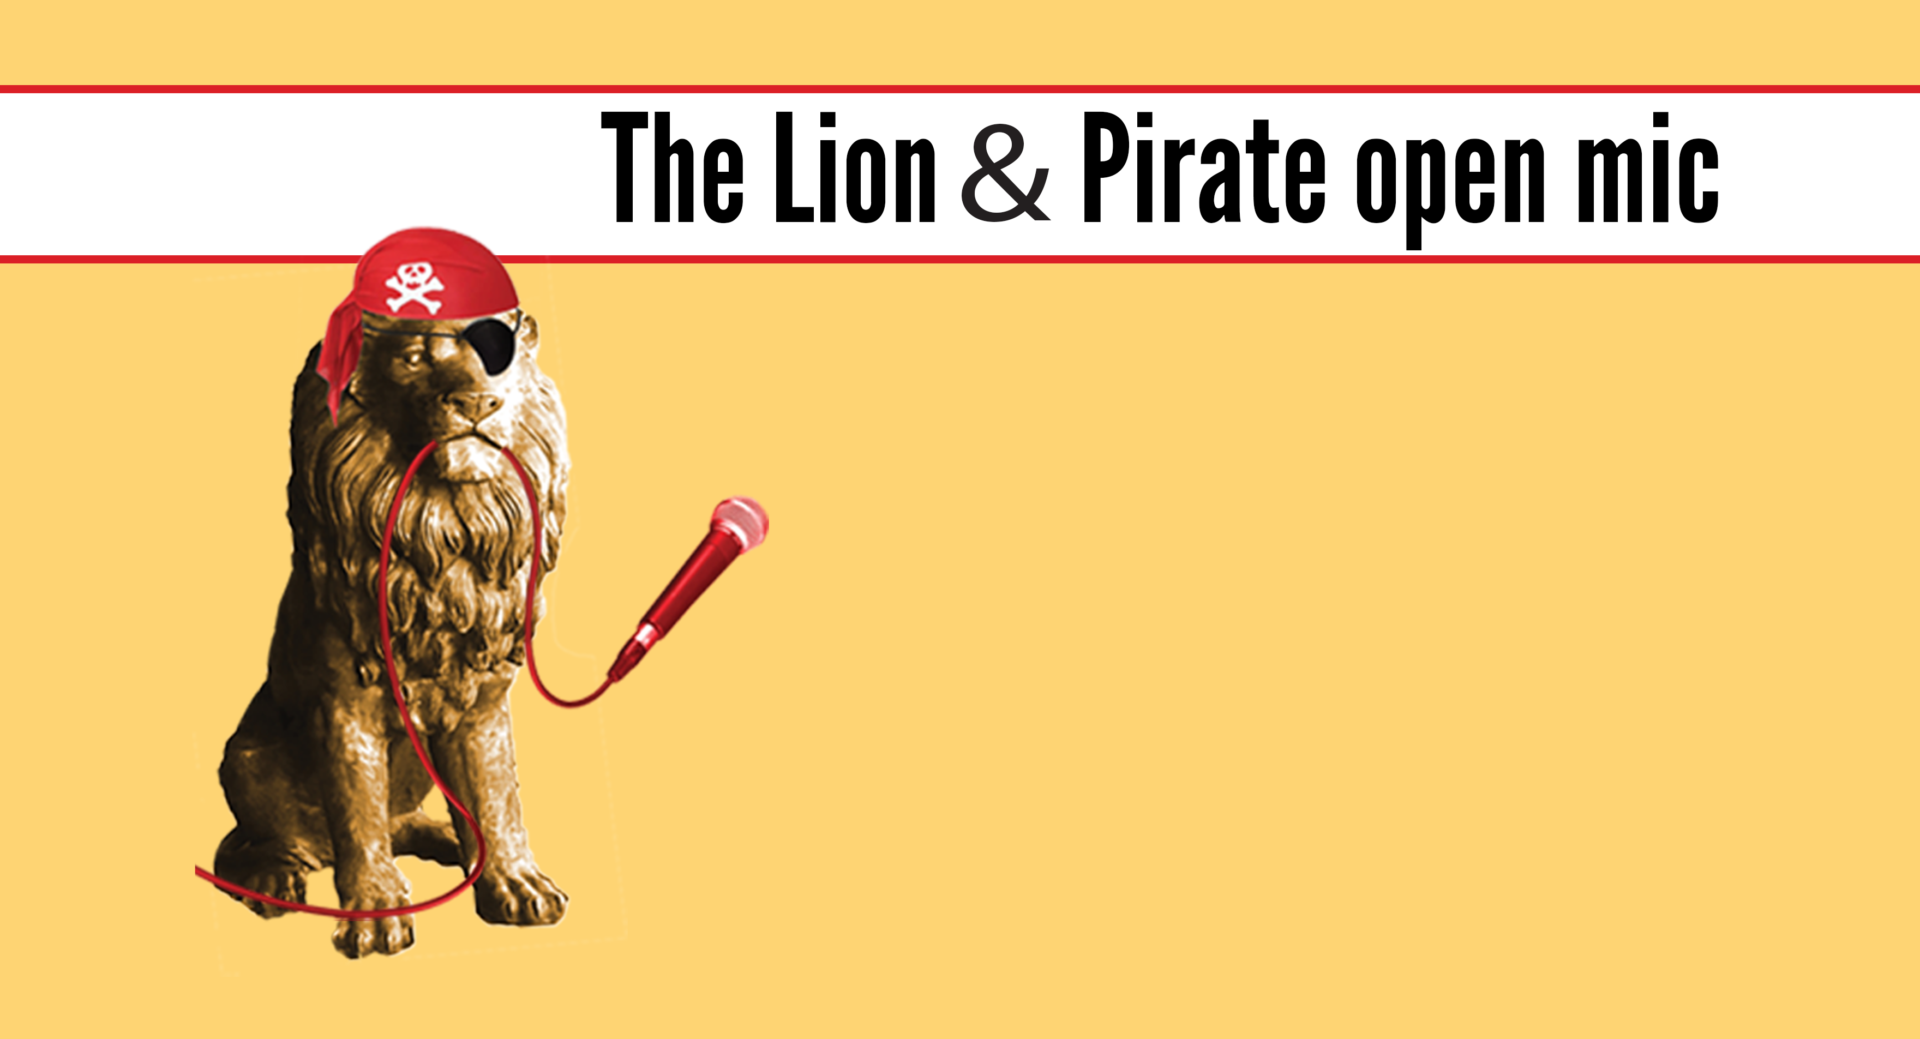 The Lion & Pirate flyer